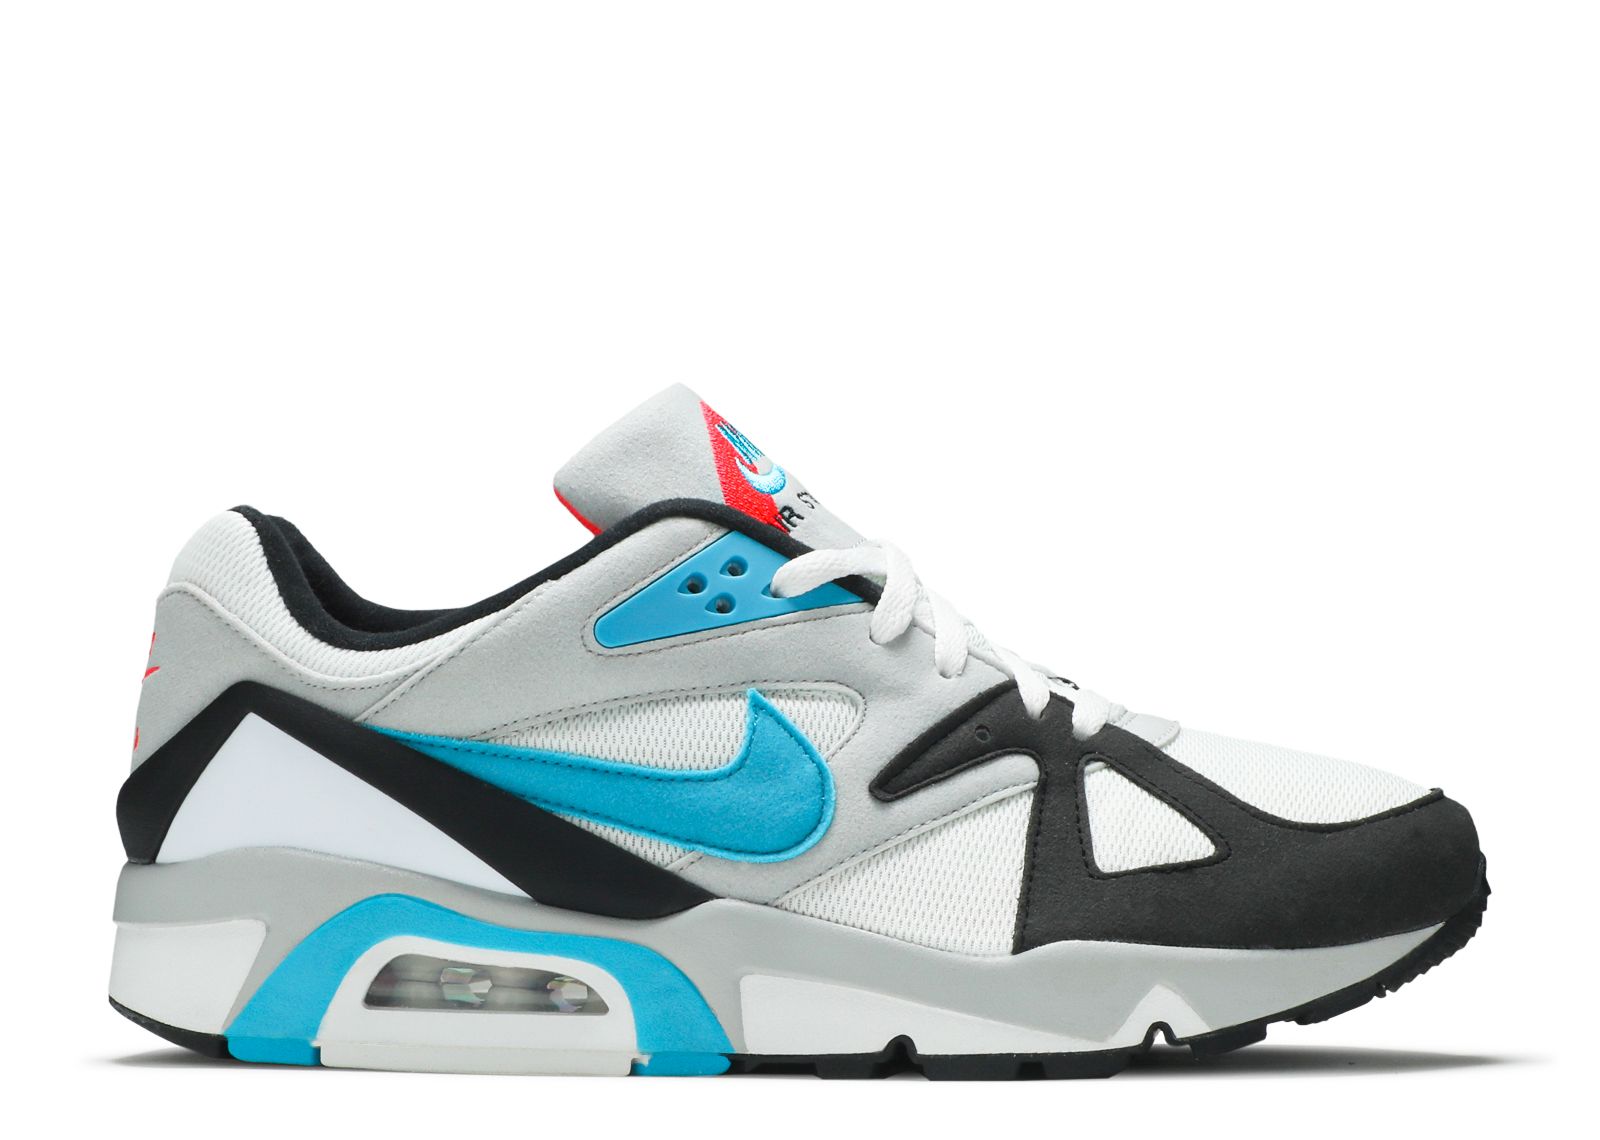 Кроссовки Nike Air Structure Triax 91 Og 'Neo Teal' 2021, белый кроссовки nike air structure triax 91 og neo teal 2021 белый